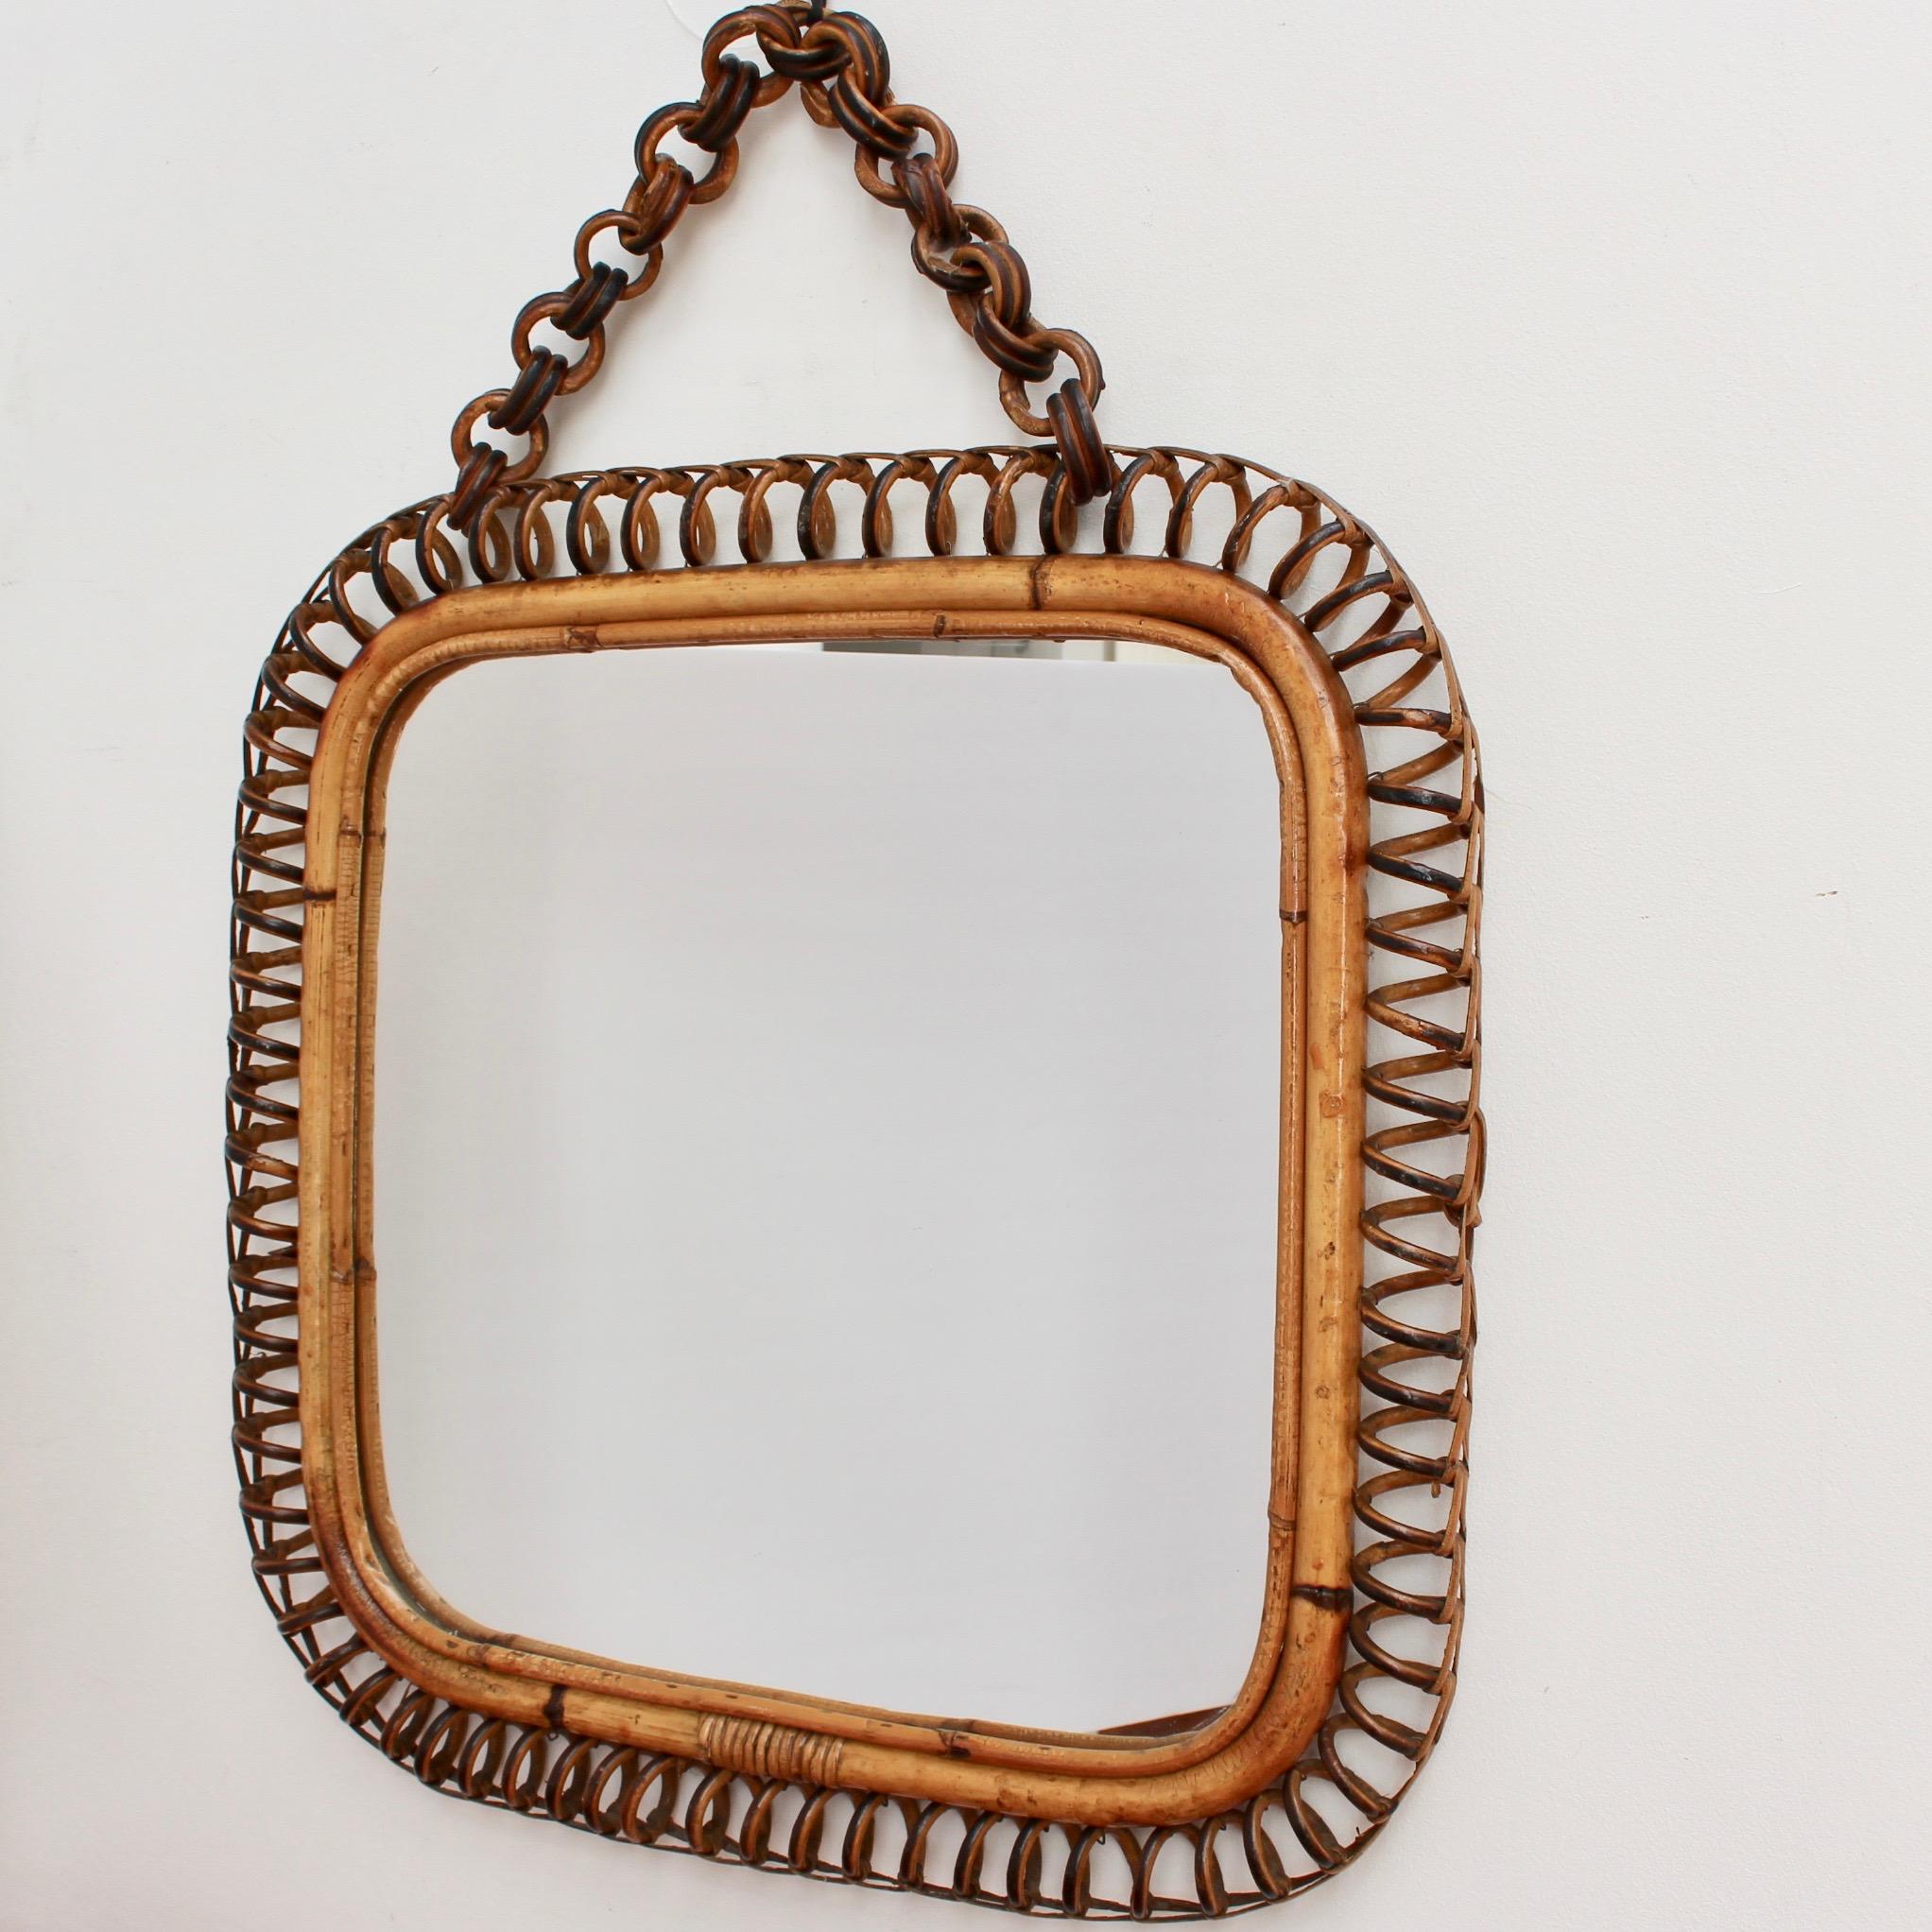 Midcentury Italian rattan square mirror with hanging chain (circa 1960s). Rarely available, this square shaped rattan mirror is a rare find. The square frame is decorated on the surround with coiled rattan reminiscent of old telephone cord. The